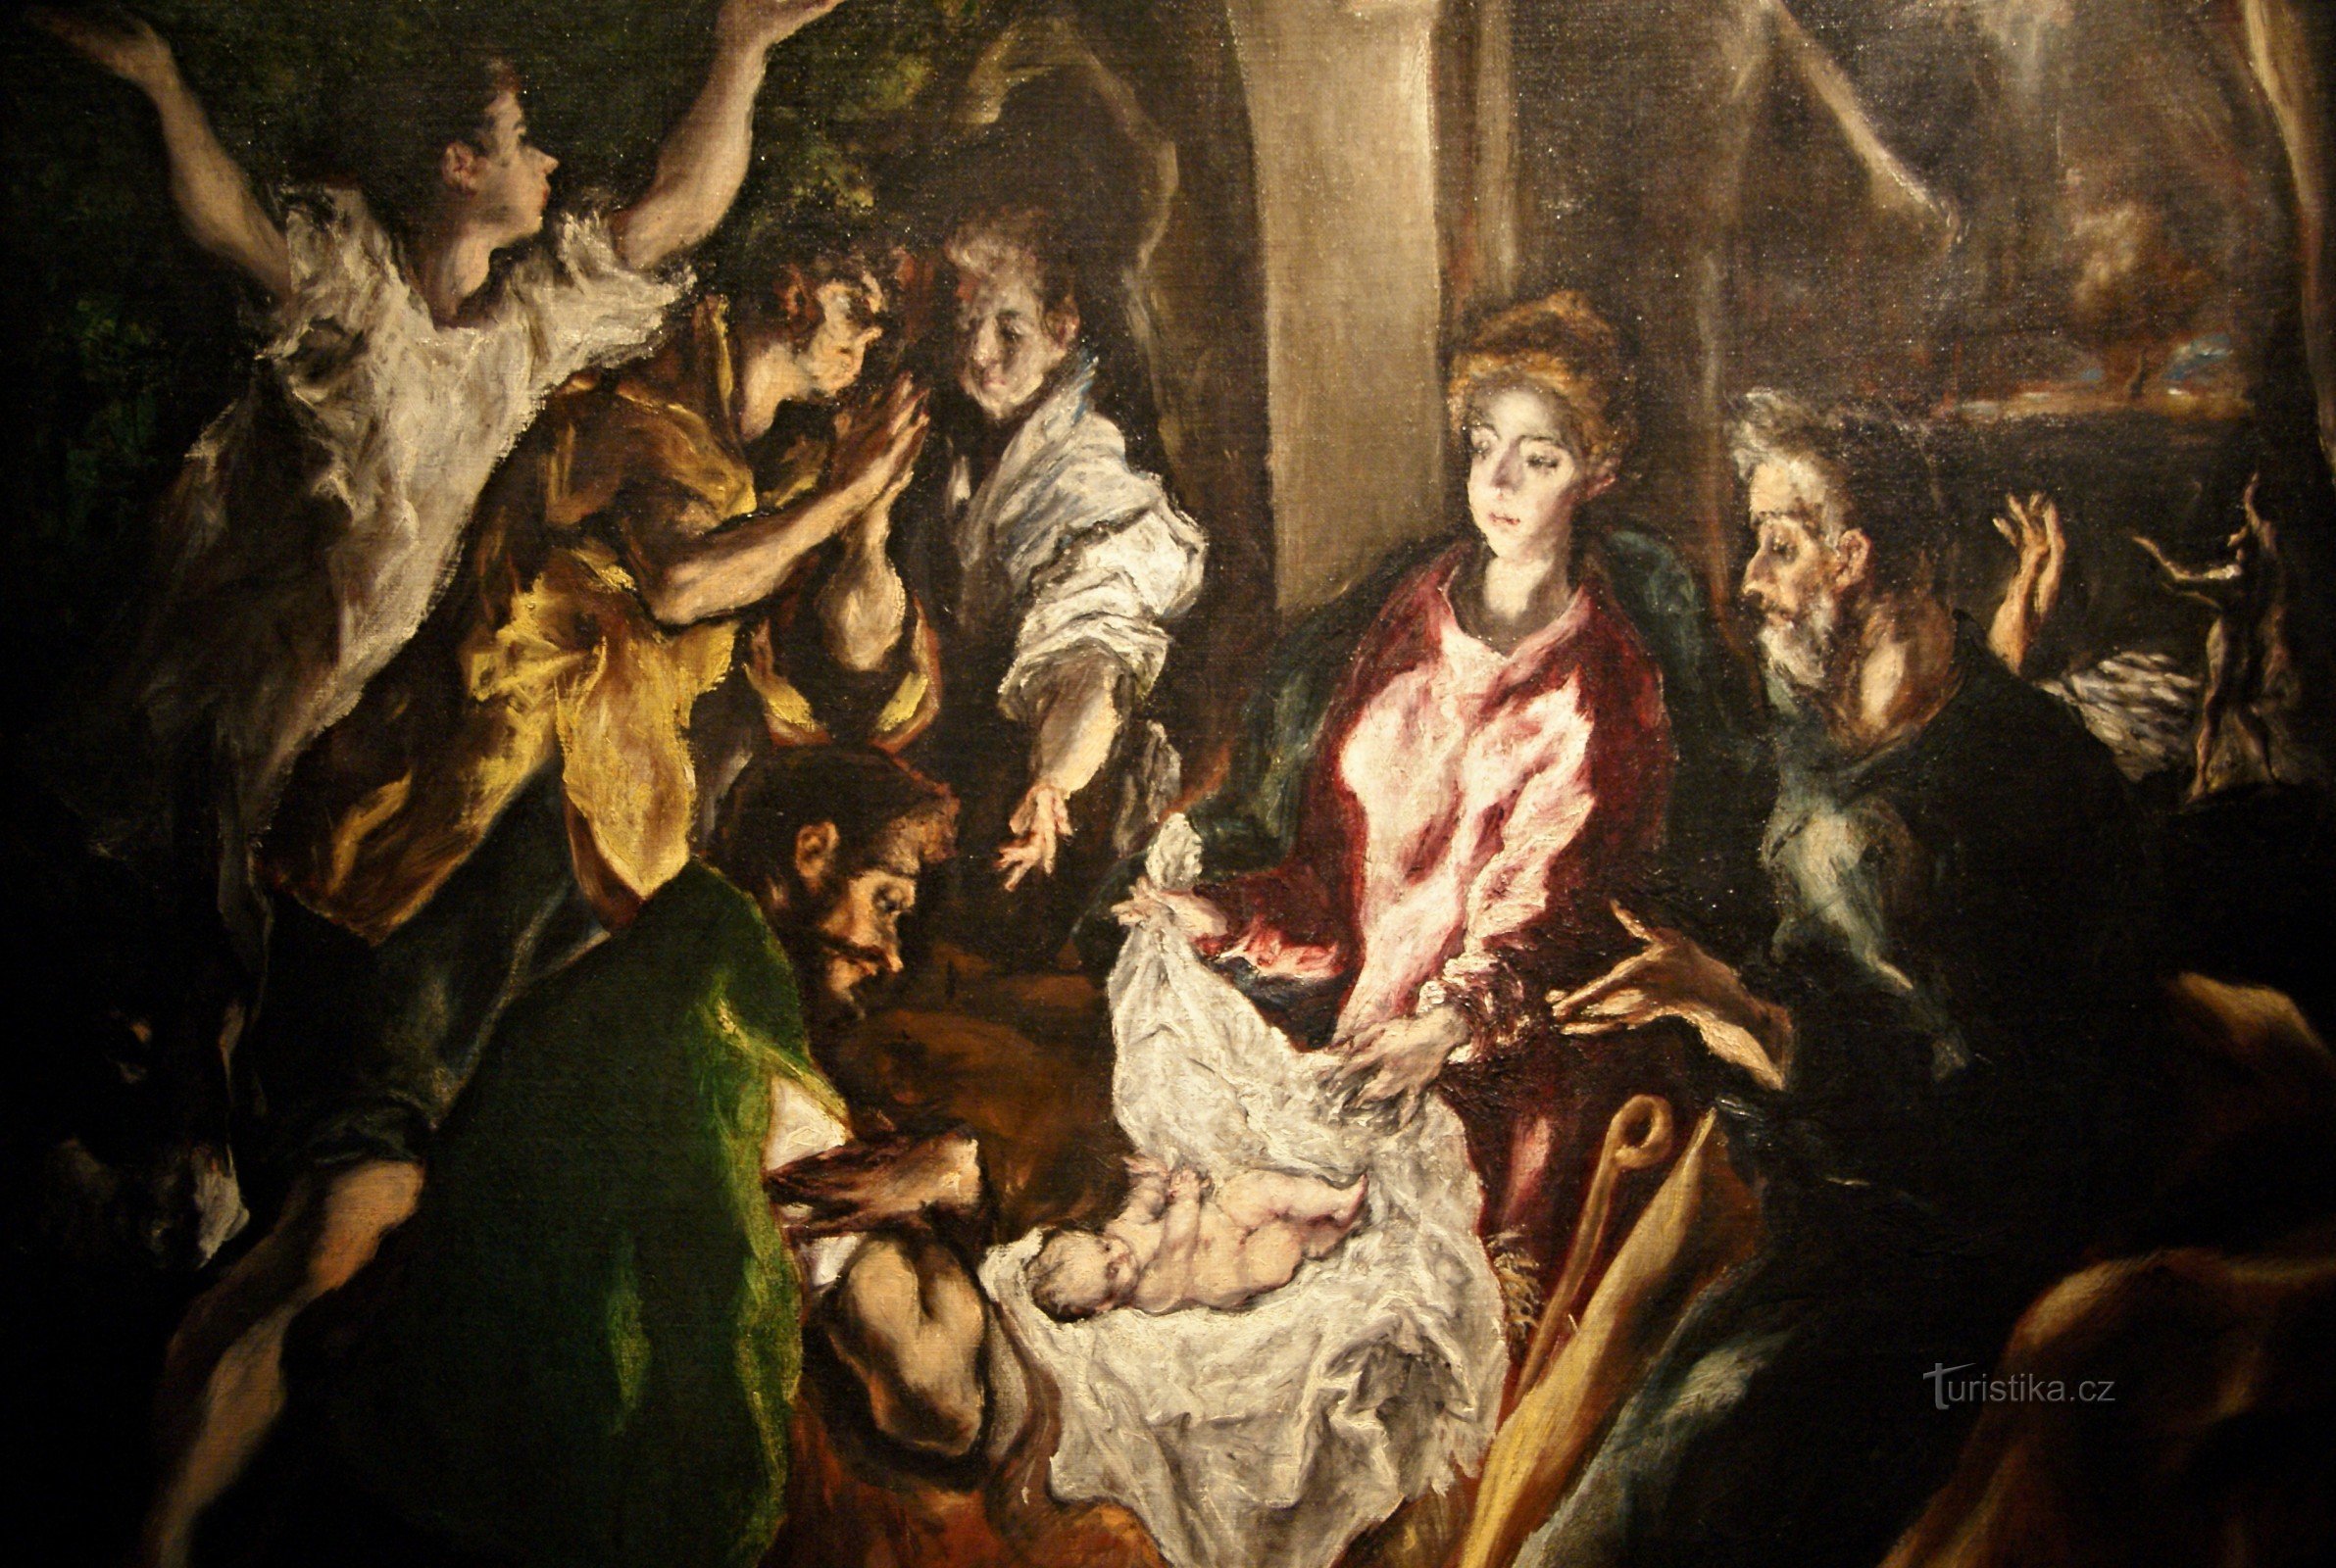 detail of El Greco's Adoration of the Shepherds